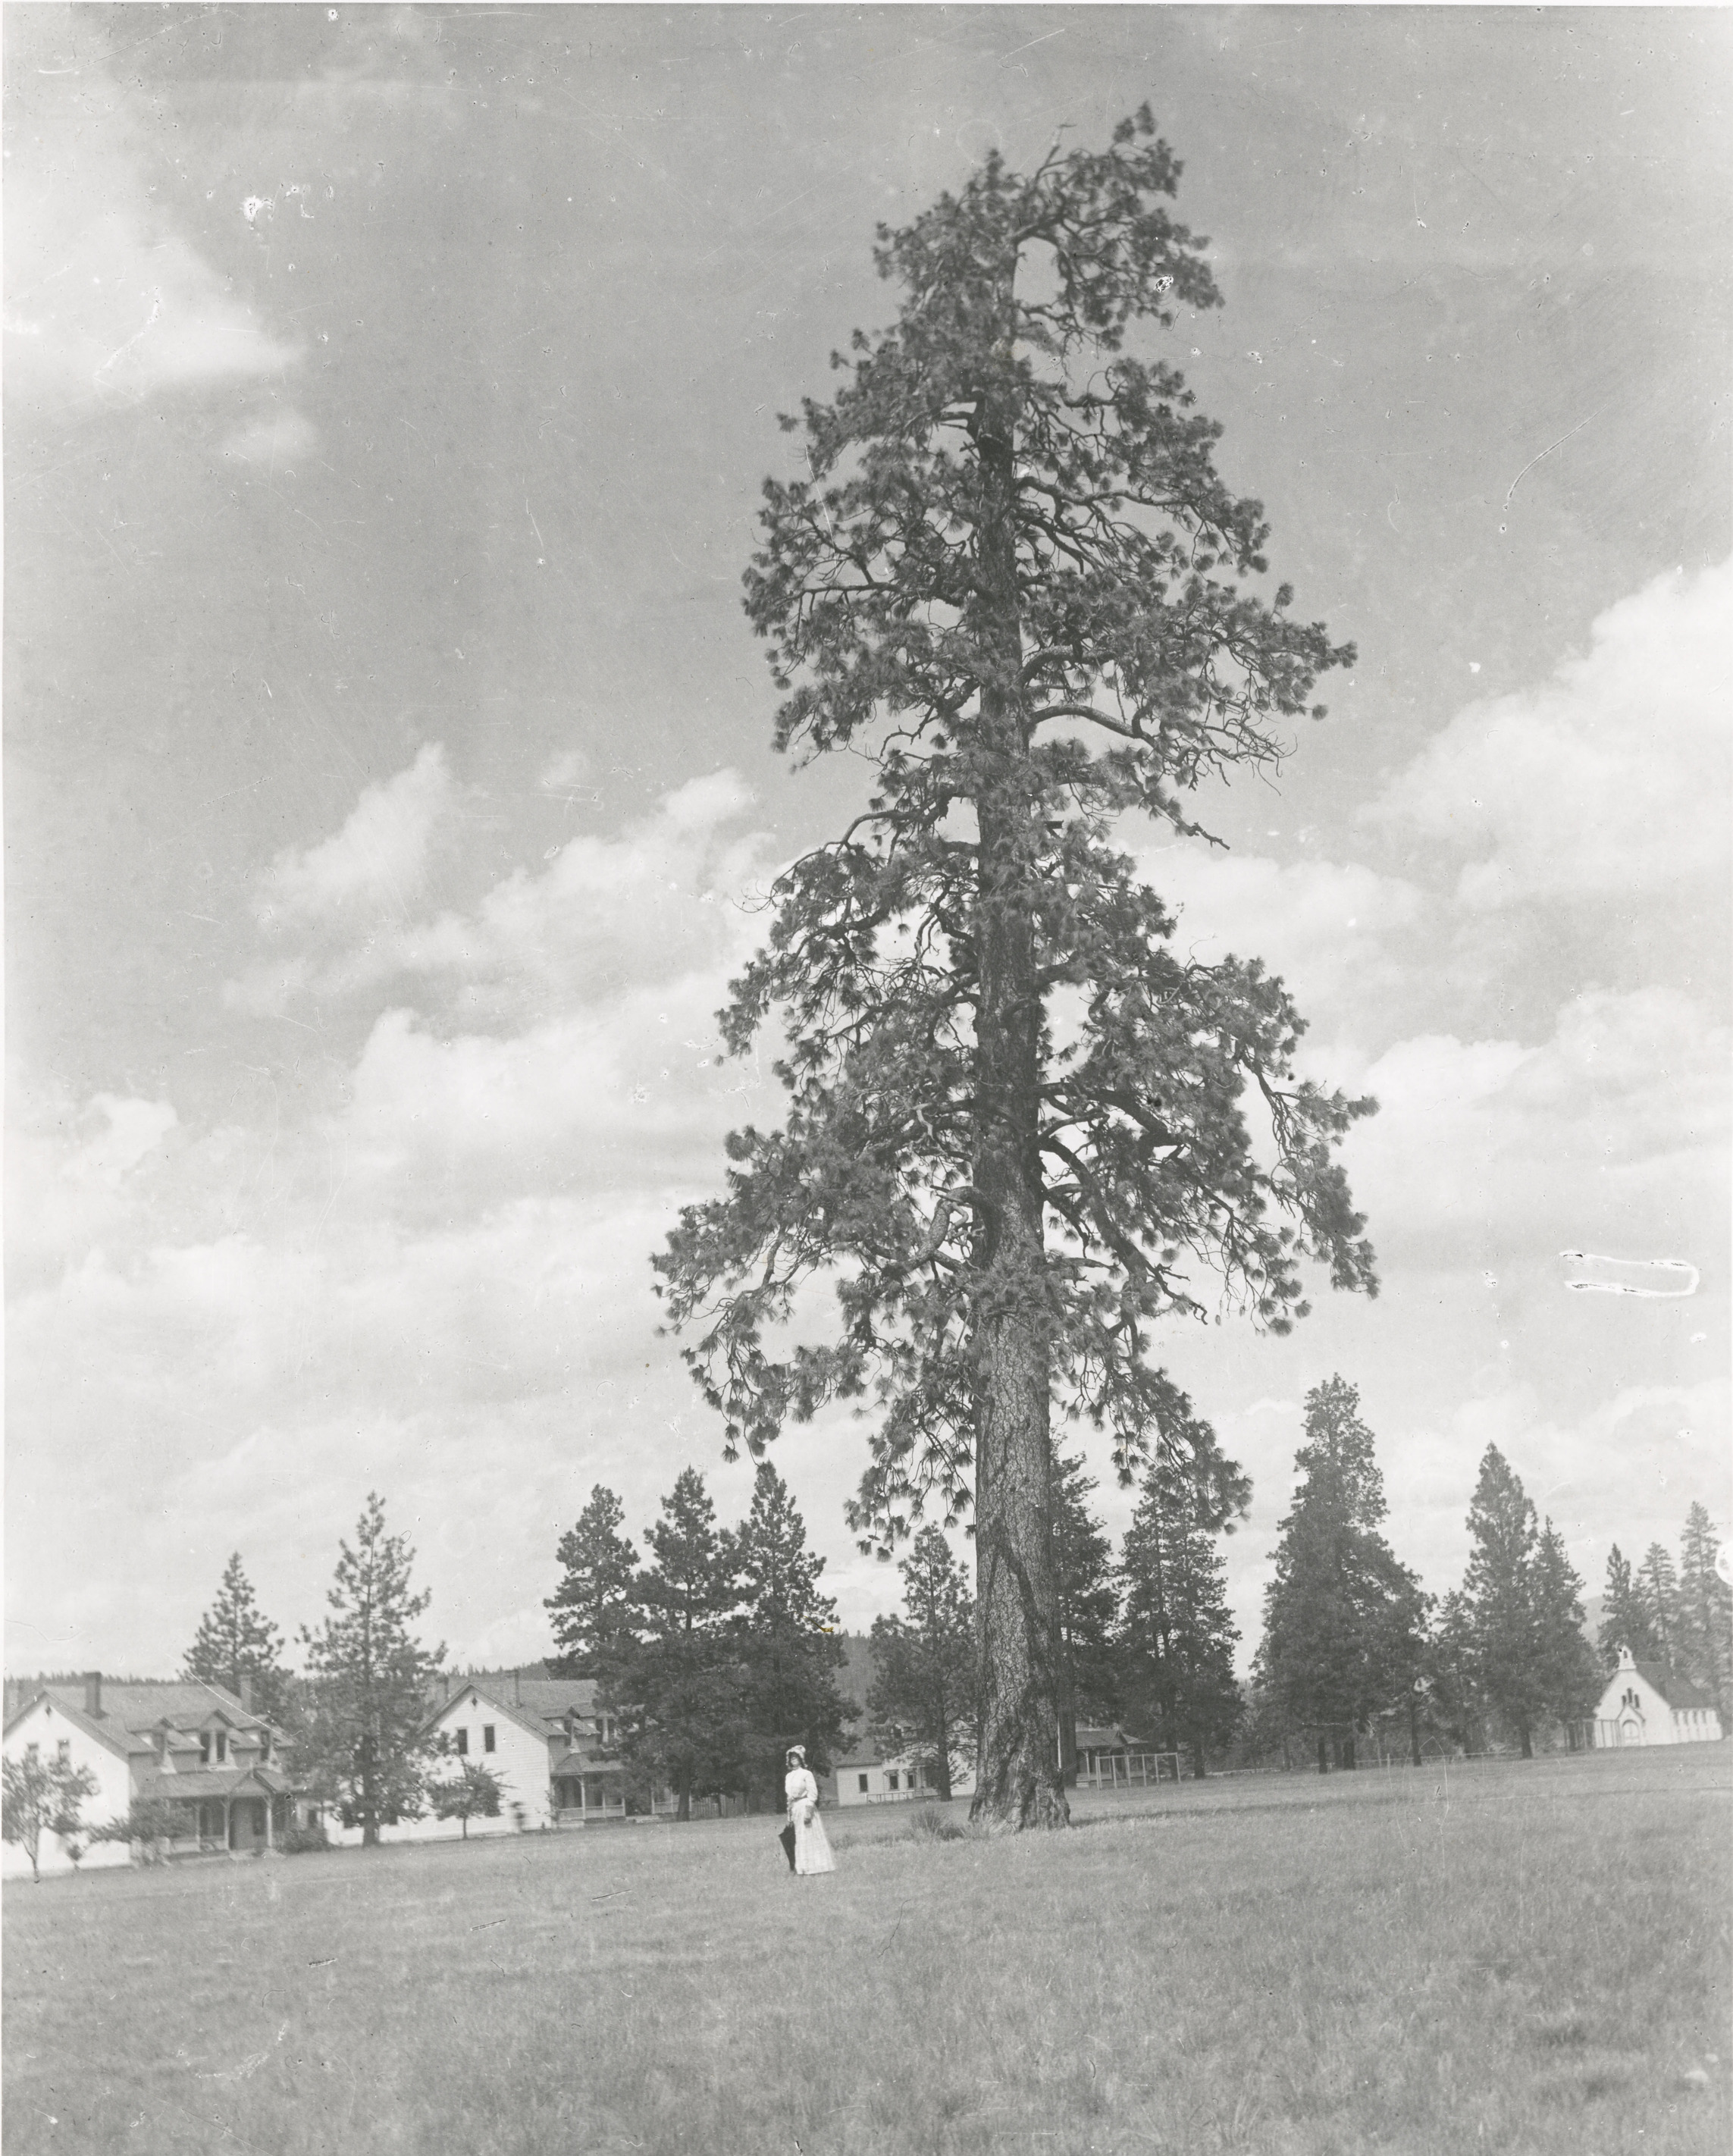 Black and white photograph of a woman standing in front of a tall pine tree